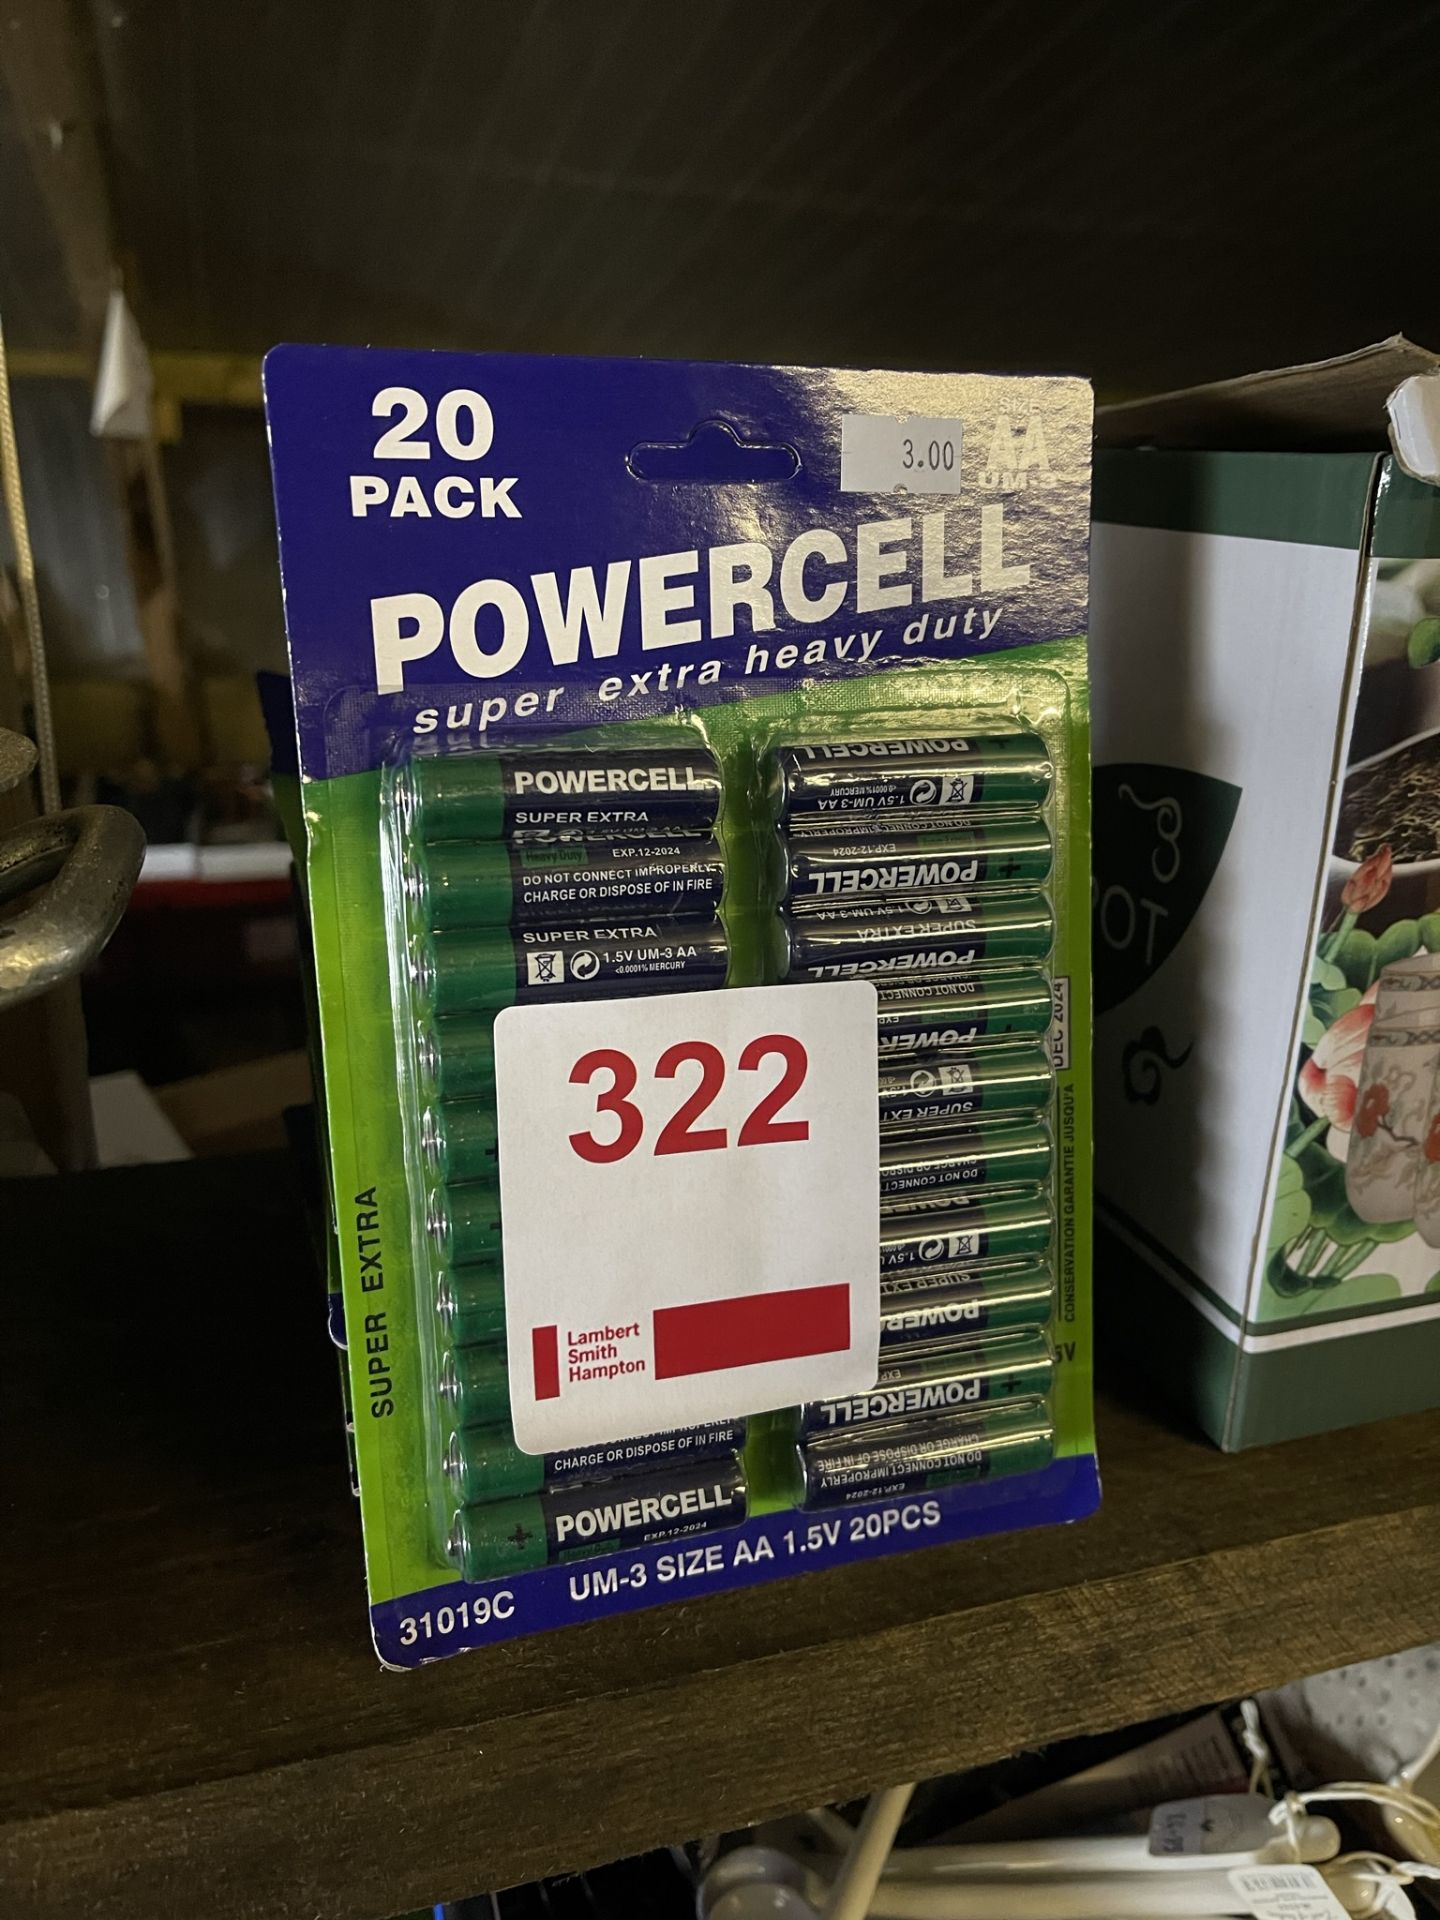 Ten pack of Powercell AA batteries